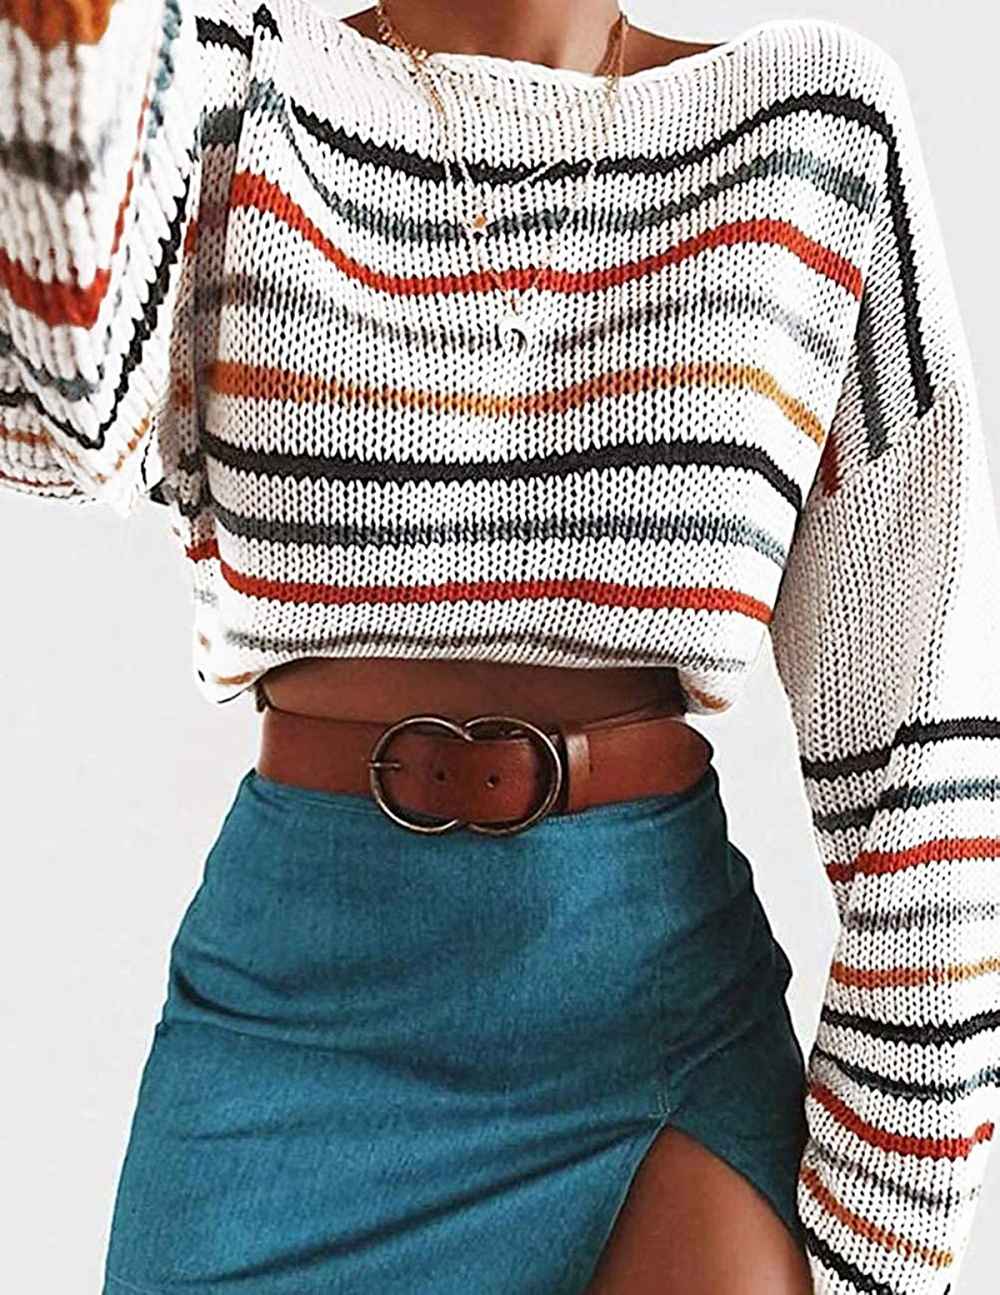 ZESICA Long Bell Sleeve Rainbow Striped Pullover Sweater